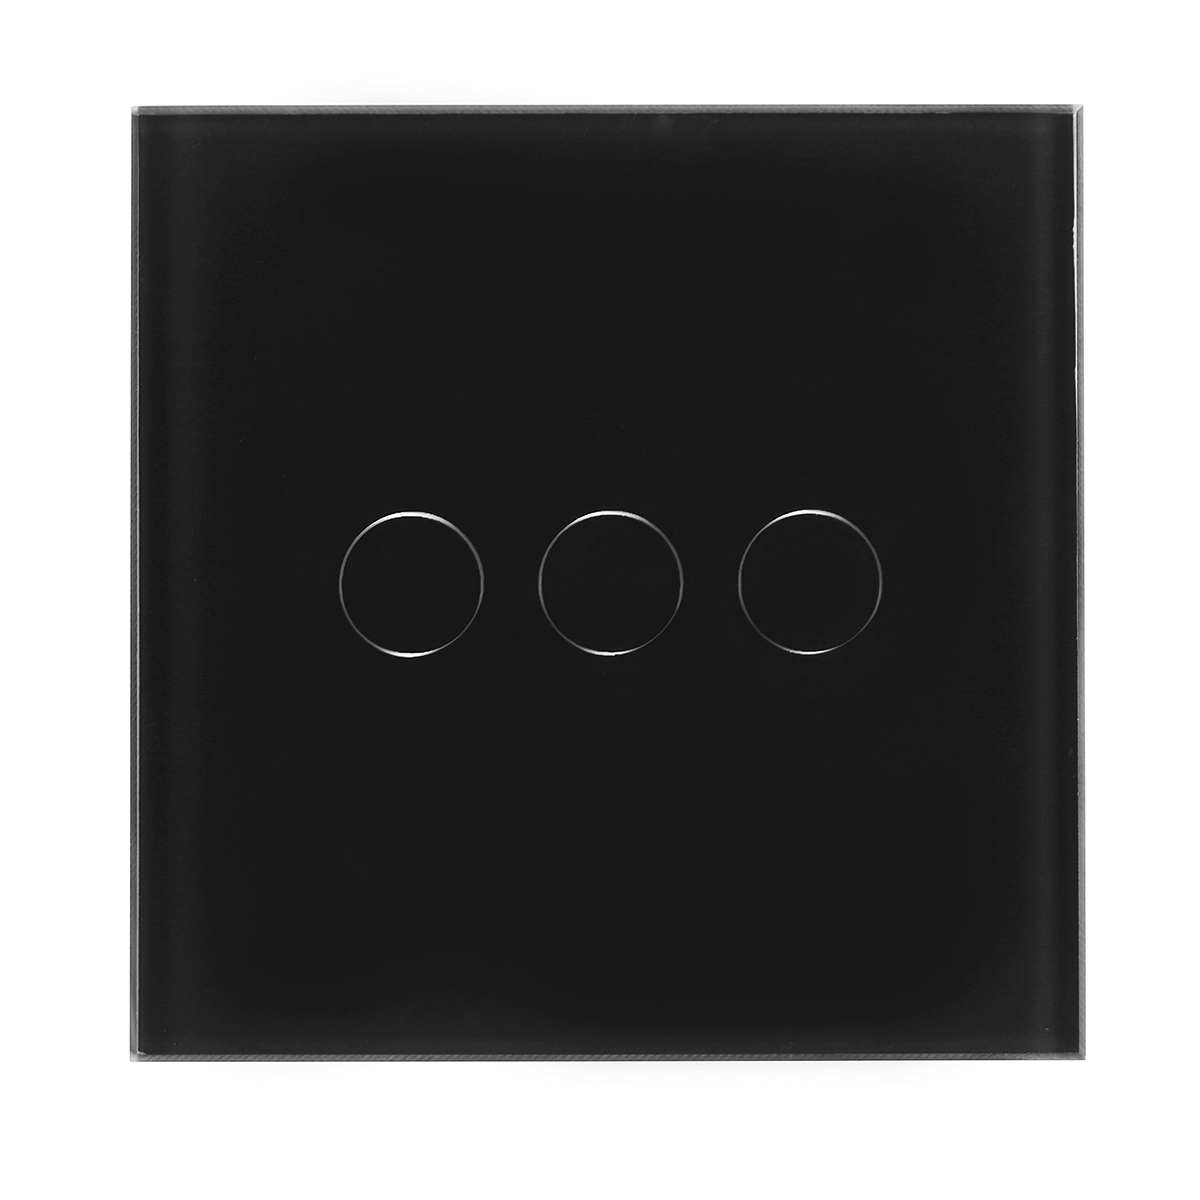 3-Gang-1-Way-WIFI-Smart-Light-Touch-Remote-Control-Wall-Switch-For-Amazon-Alexa-1206040-8